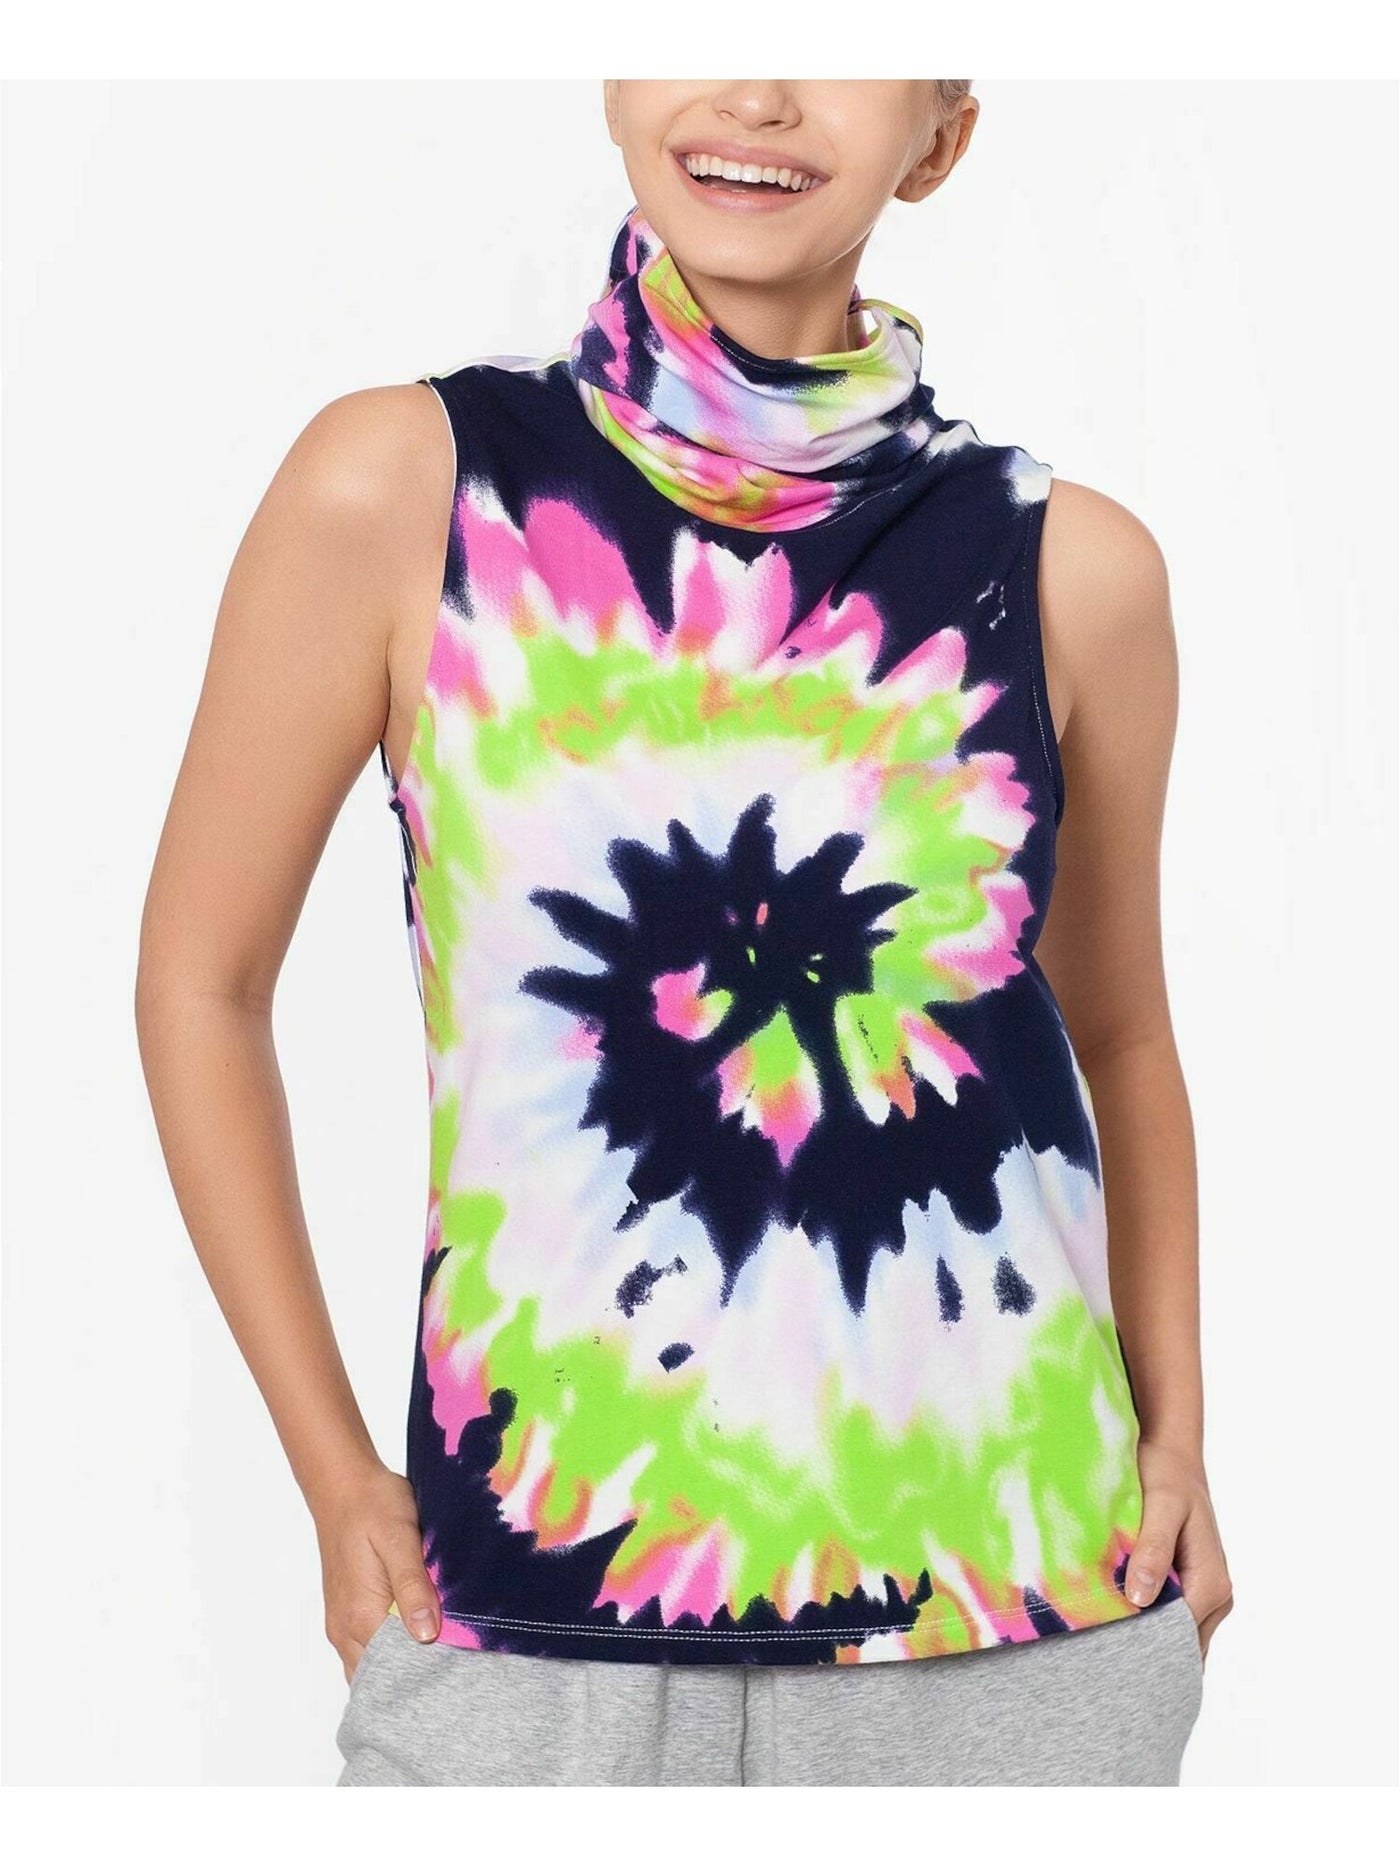 BAM BY BETSY & ADAM Womens White Cotton Blend Built-in Mask Tie Dye Sleeveless Tank Top XL